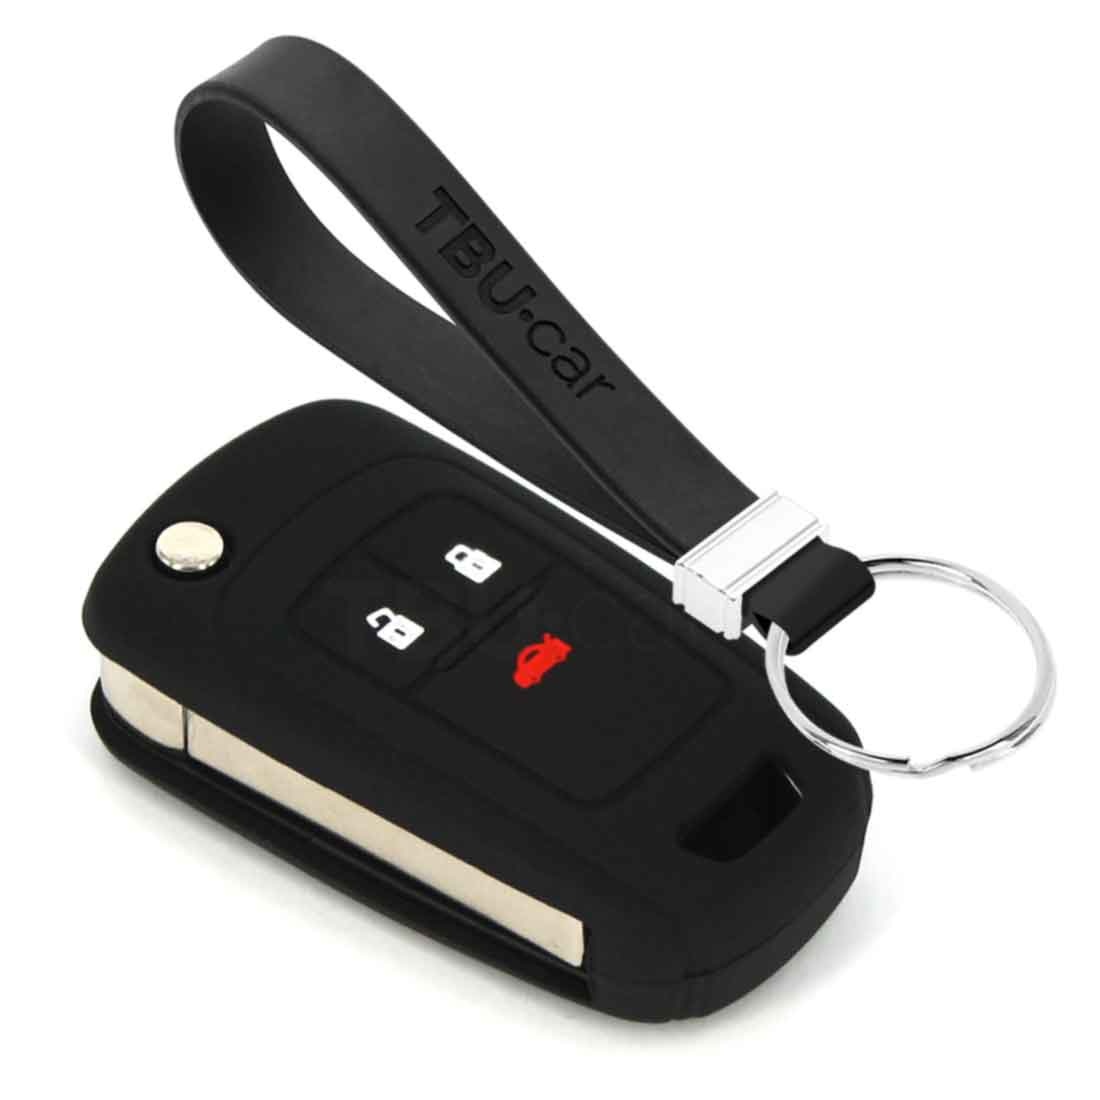 TBU car TBU car Car key cover compatible with Vauxhall - Silicone Protective Remote Key Shell - FOB Case Cover - Black